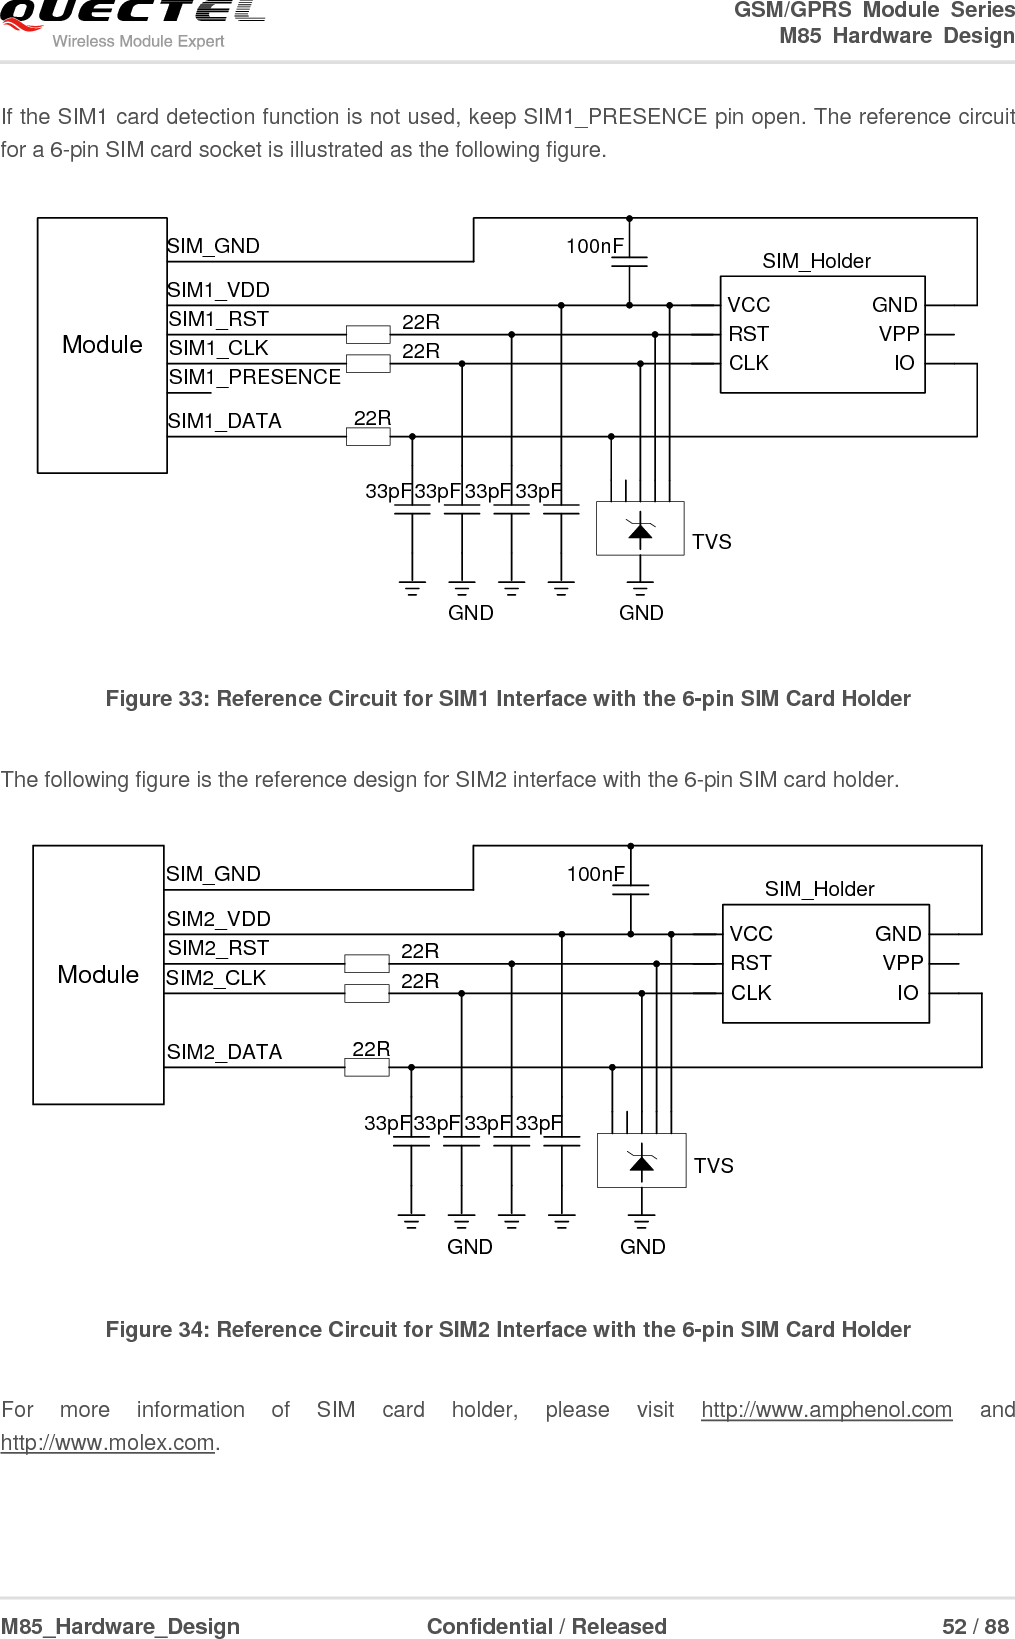                                                                                                                                               GSM/GPRS  Module  Series                                                                 M85  Hardware  Design  M85_Hardware_Design                  Confidential / Released                             52 / 88      If the SIM1 card detection function is not used, keep SIM1_PRESENCE pin open. The reference circuit for a 6-pin SIM card socket is illustrated as the following figure.  ModuleSIM1_VDDSIM_GNDSIM1_RSTSIM1_CLKSIM1_DATASIM1_PRESENCE22R22R22R100nF SIM_HolderGNDTVS33pF33pF 33pFVCCRSTCLK IOVPPGNDGND33pF Figure 33: Reference Circuit for SIM1 Interface with the 6-pin SIM Card Holder  The following figure is the reference design for SIM2 interface with the 6-pin SIM card holder.  ModuleSIM2_VDDSIM_GNDSIM2_RSTSIM2_CLKSIM2_DATA 22R22R22R100nF SIM_HolderGNDTVS33pF33pF 33pFVCCRSTCLK IOVPPGNDGND33pF Figure 34: Reference Circuit for SIM2 Interface with the 6-pin SIM Card Holder  For  more  information  of  SIM  card  holder,  please  visit  http://www.amphenol.com  and http://www.molex.com.      